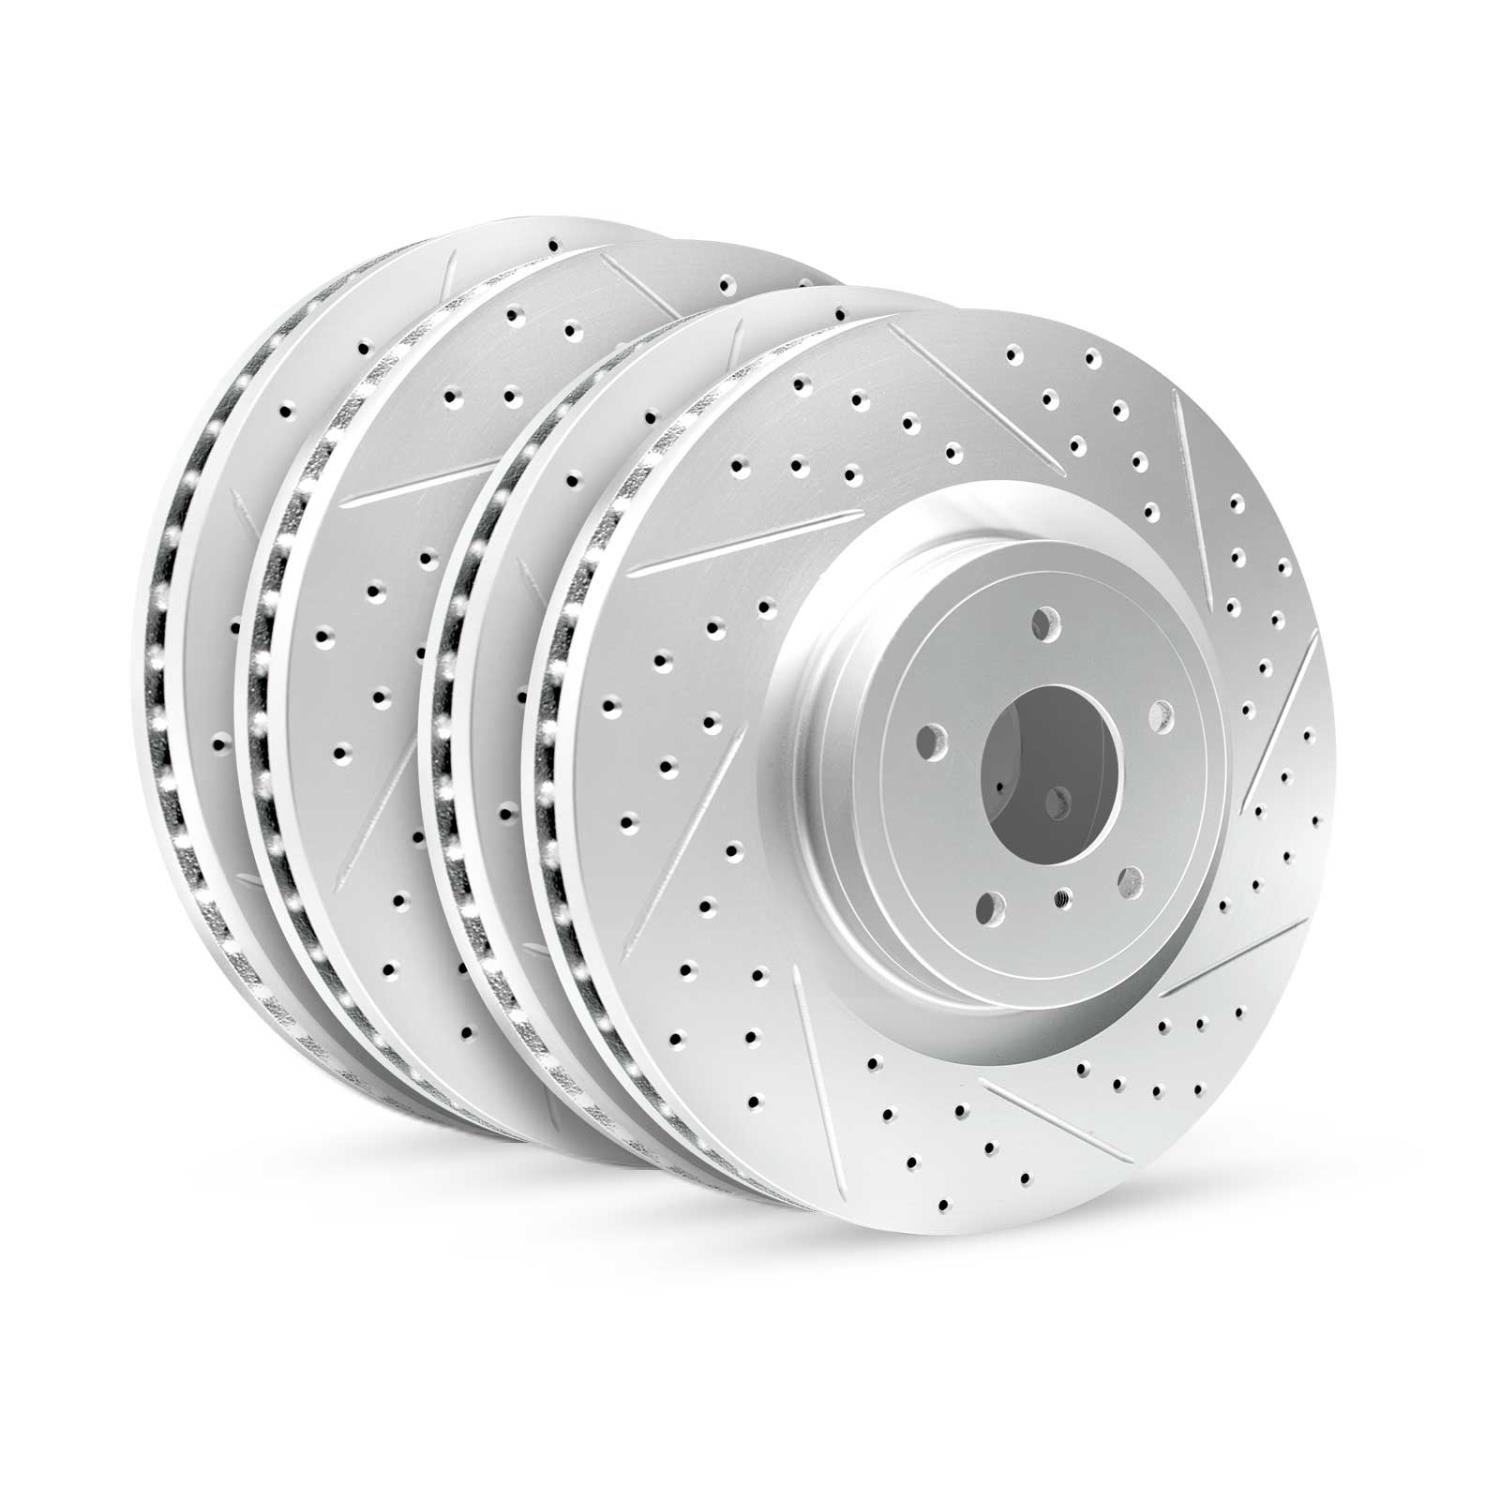 GEO-Carbon Drilled/Slotted Rotors, 2007-2018 BMW, Position: Front/Rear